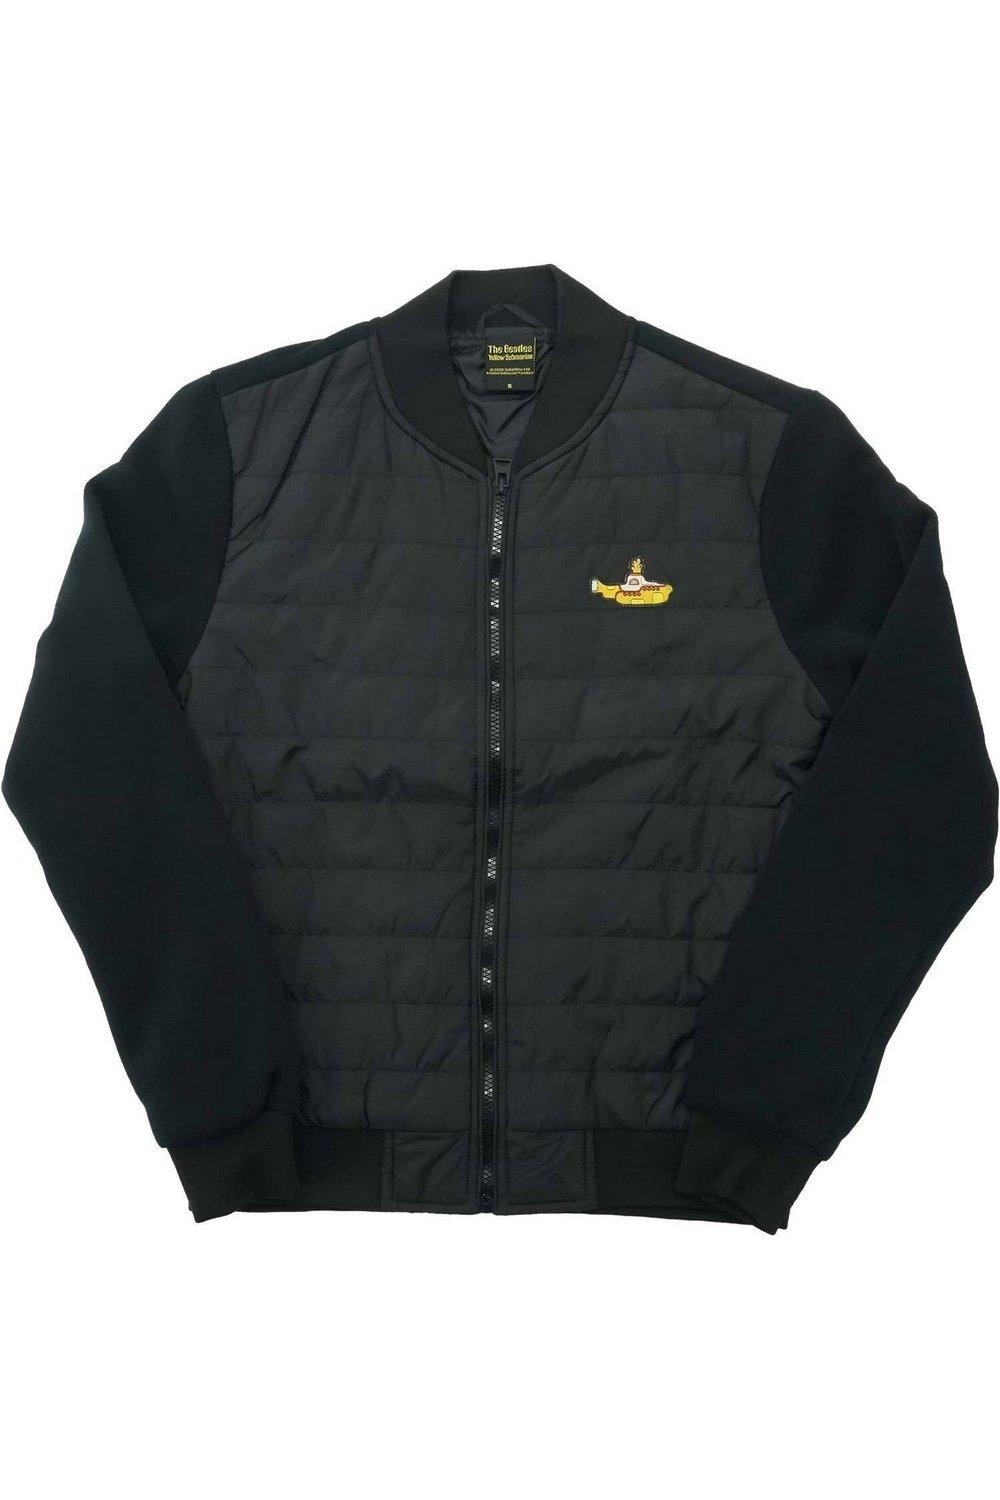 Yellow Submarine Quilted Padded Jacket